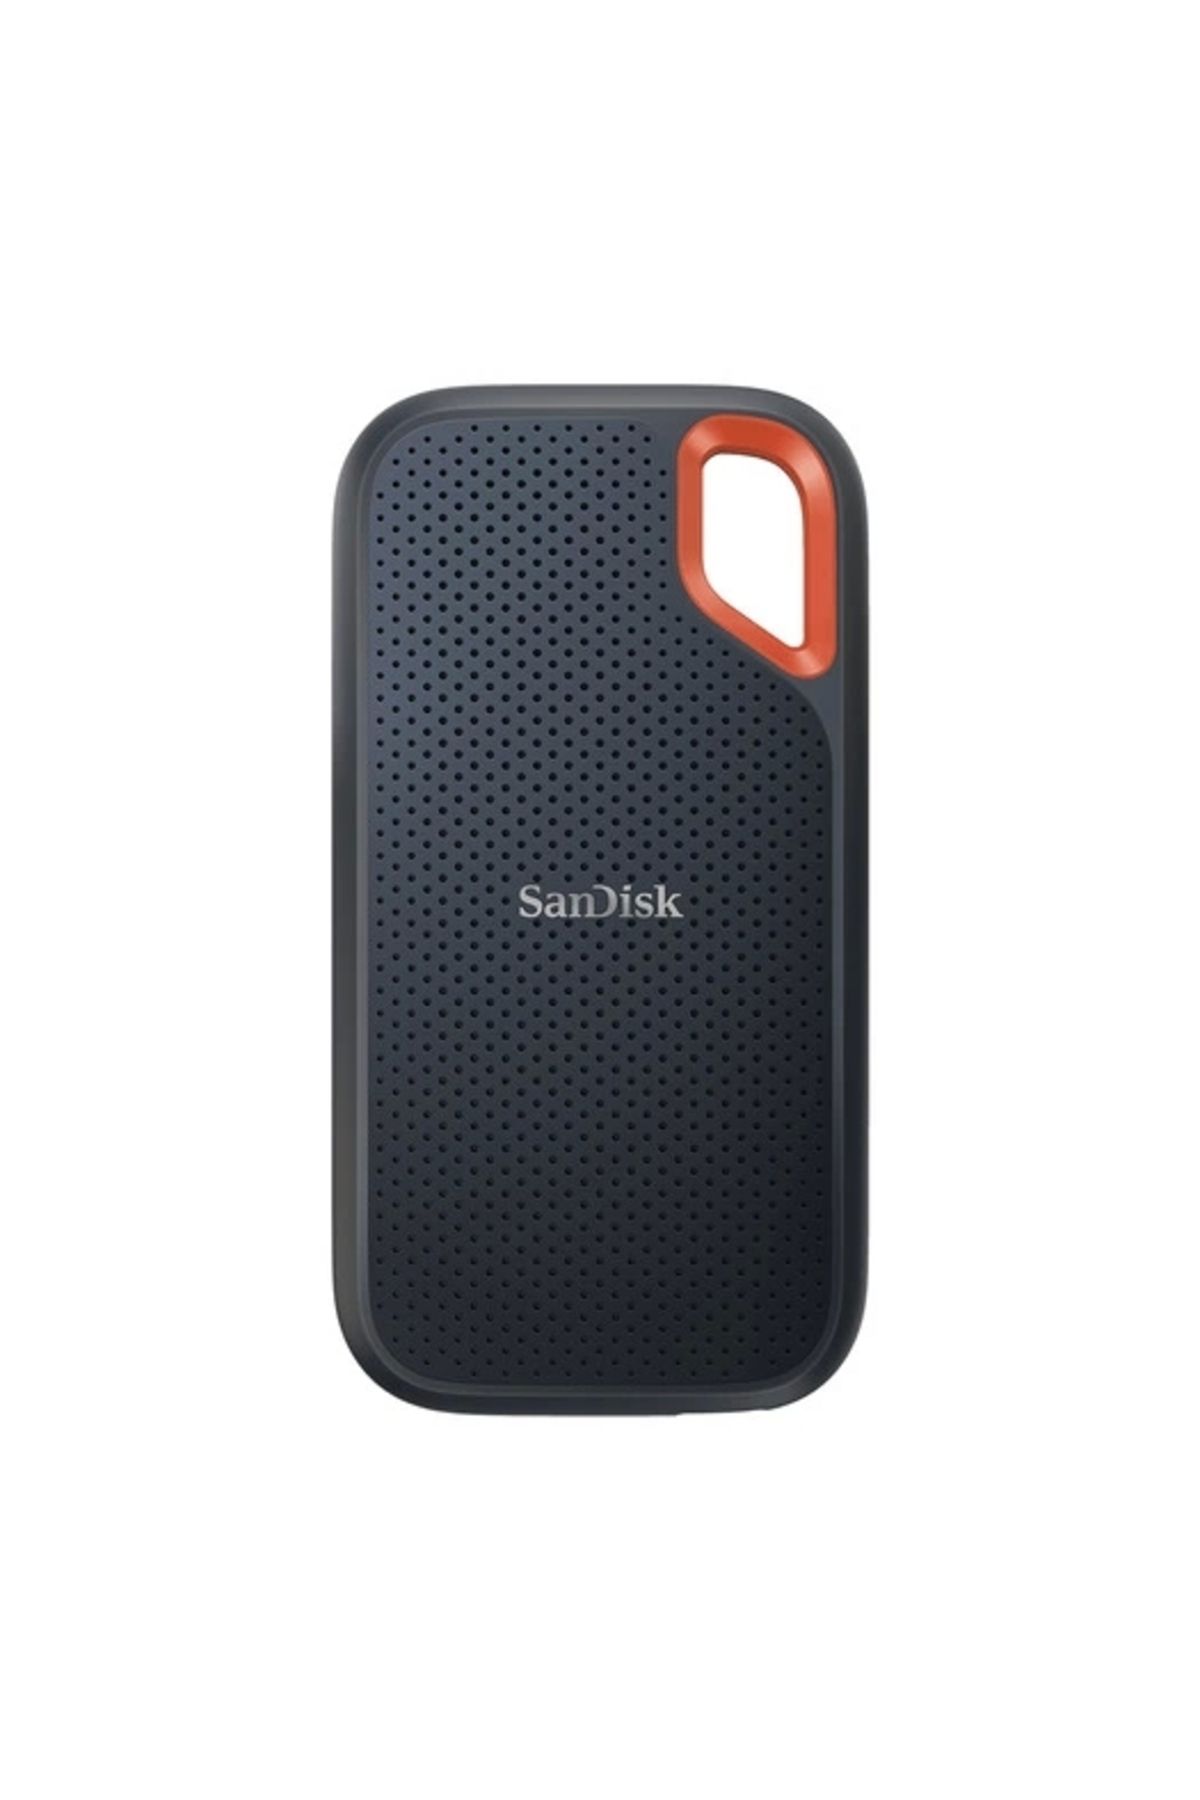 Sandisk Extreme Portable Ssd 4tb